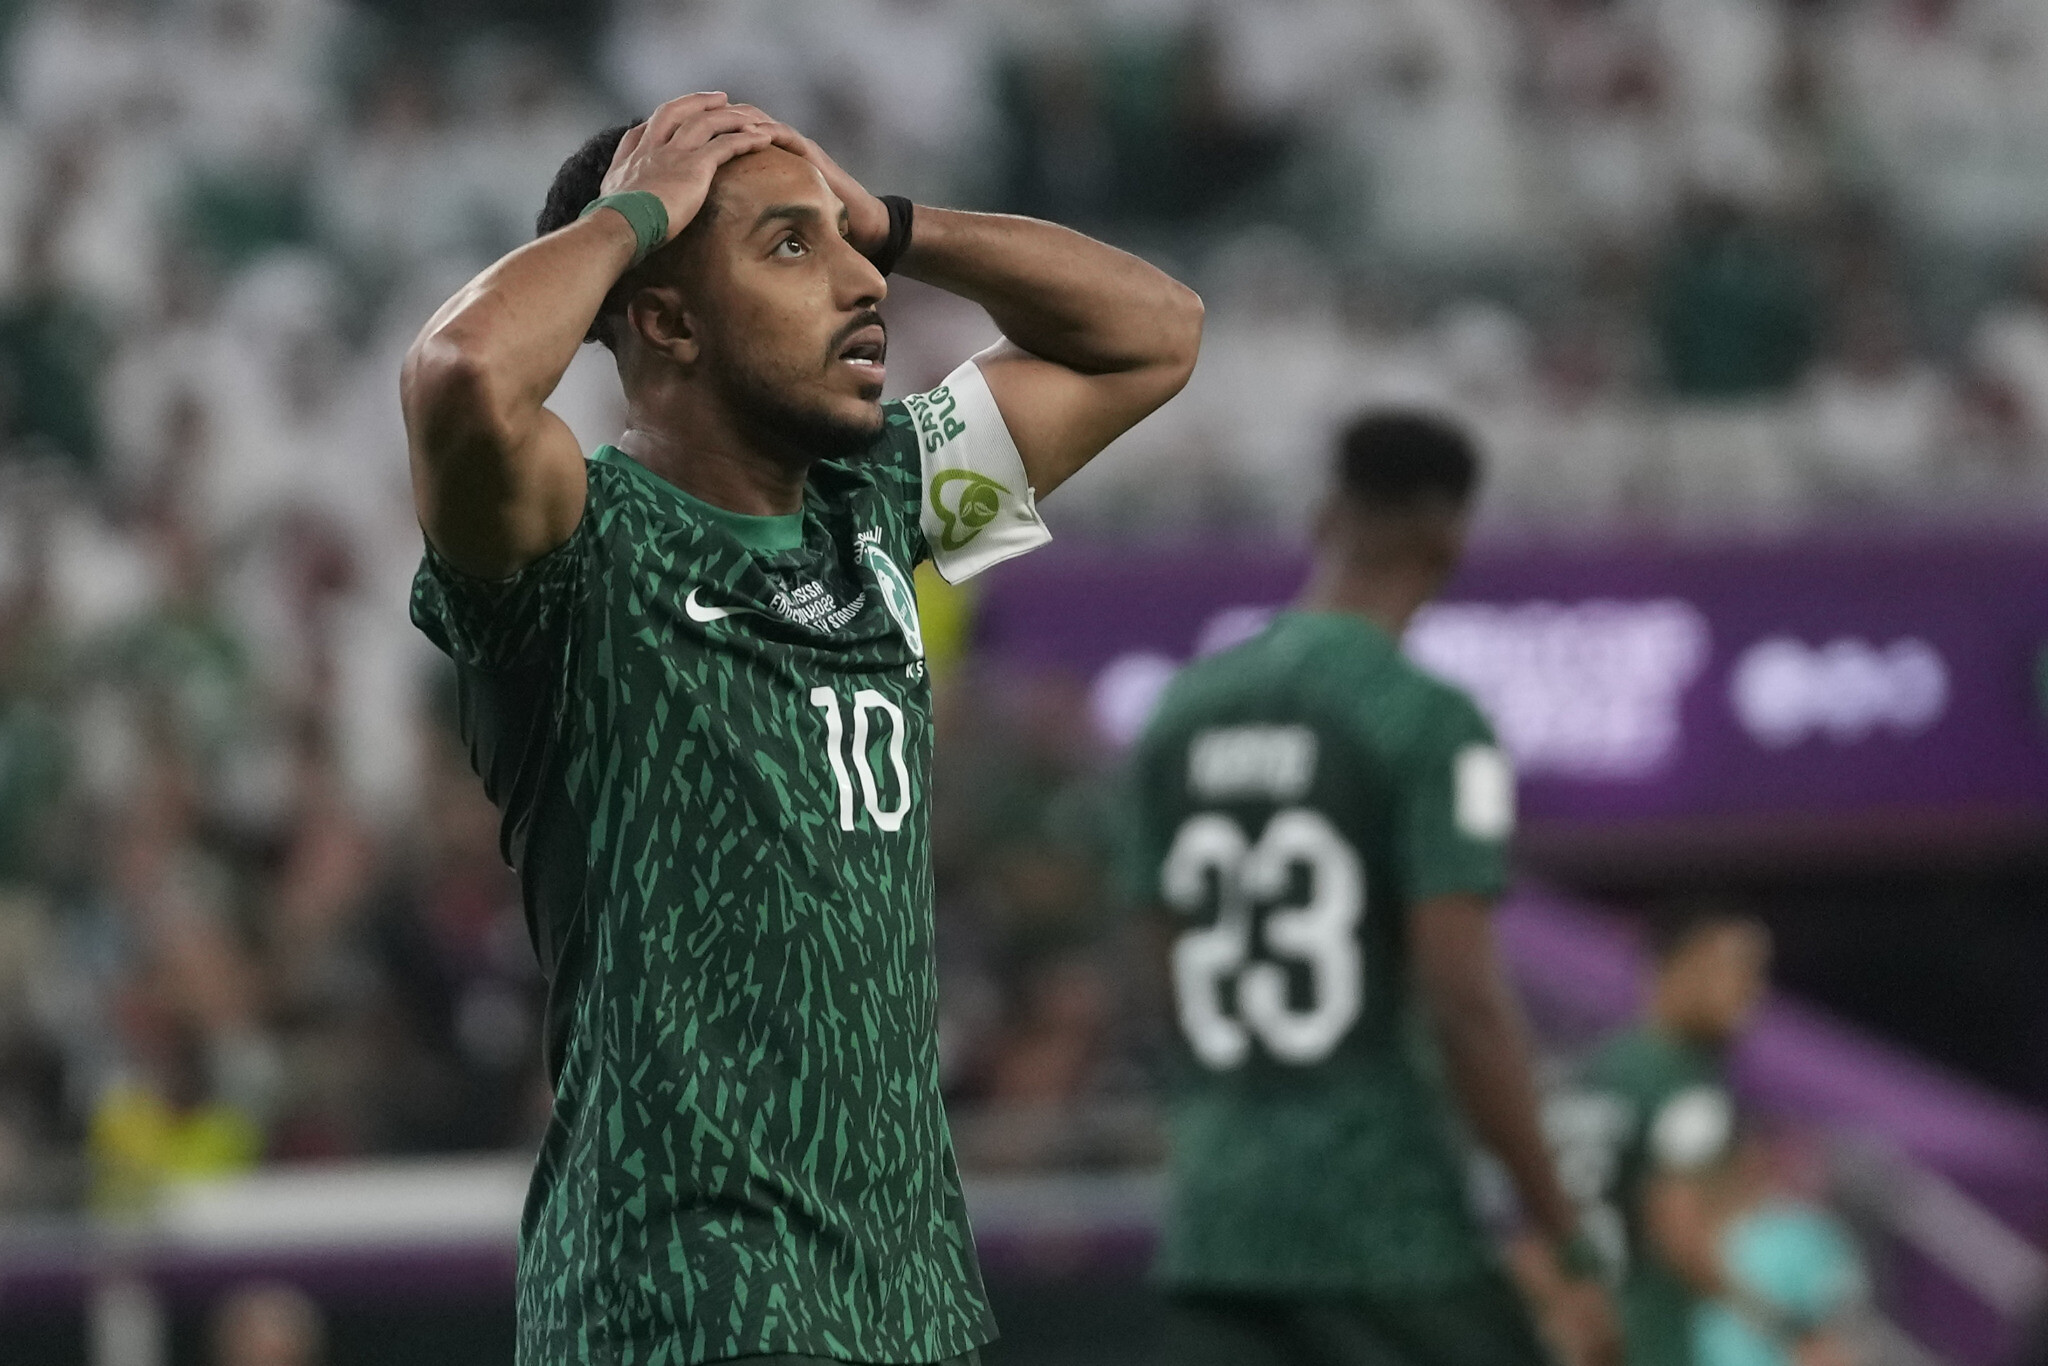 Saudis lose second World Cup game after stunning initial win over Argentina The Times of Israel